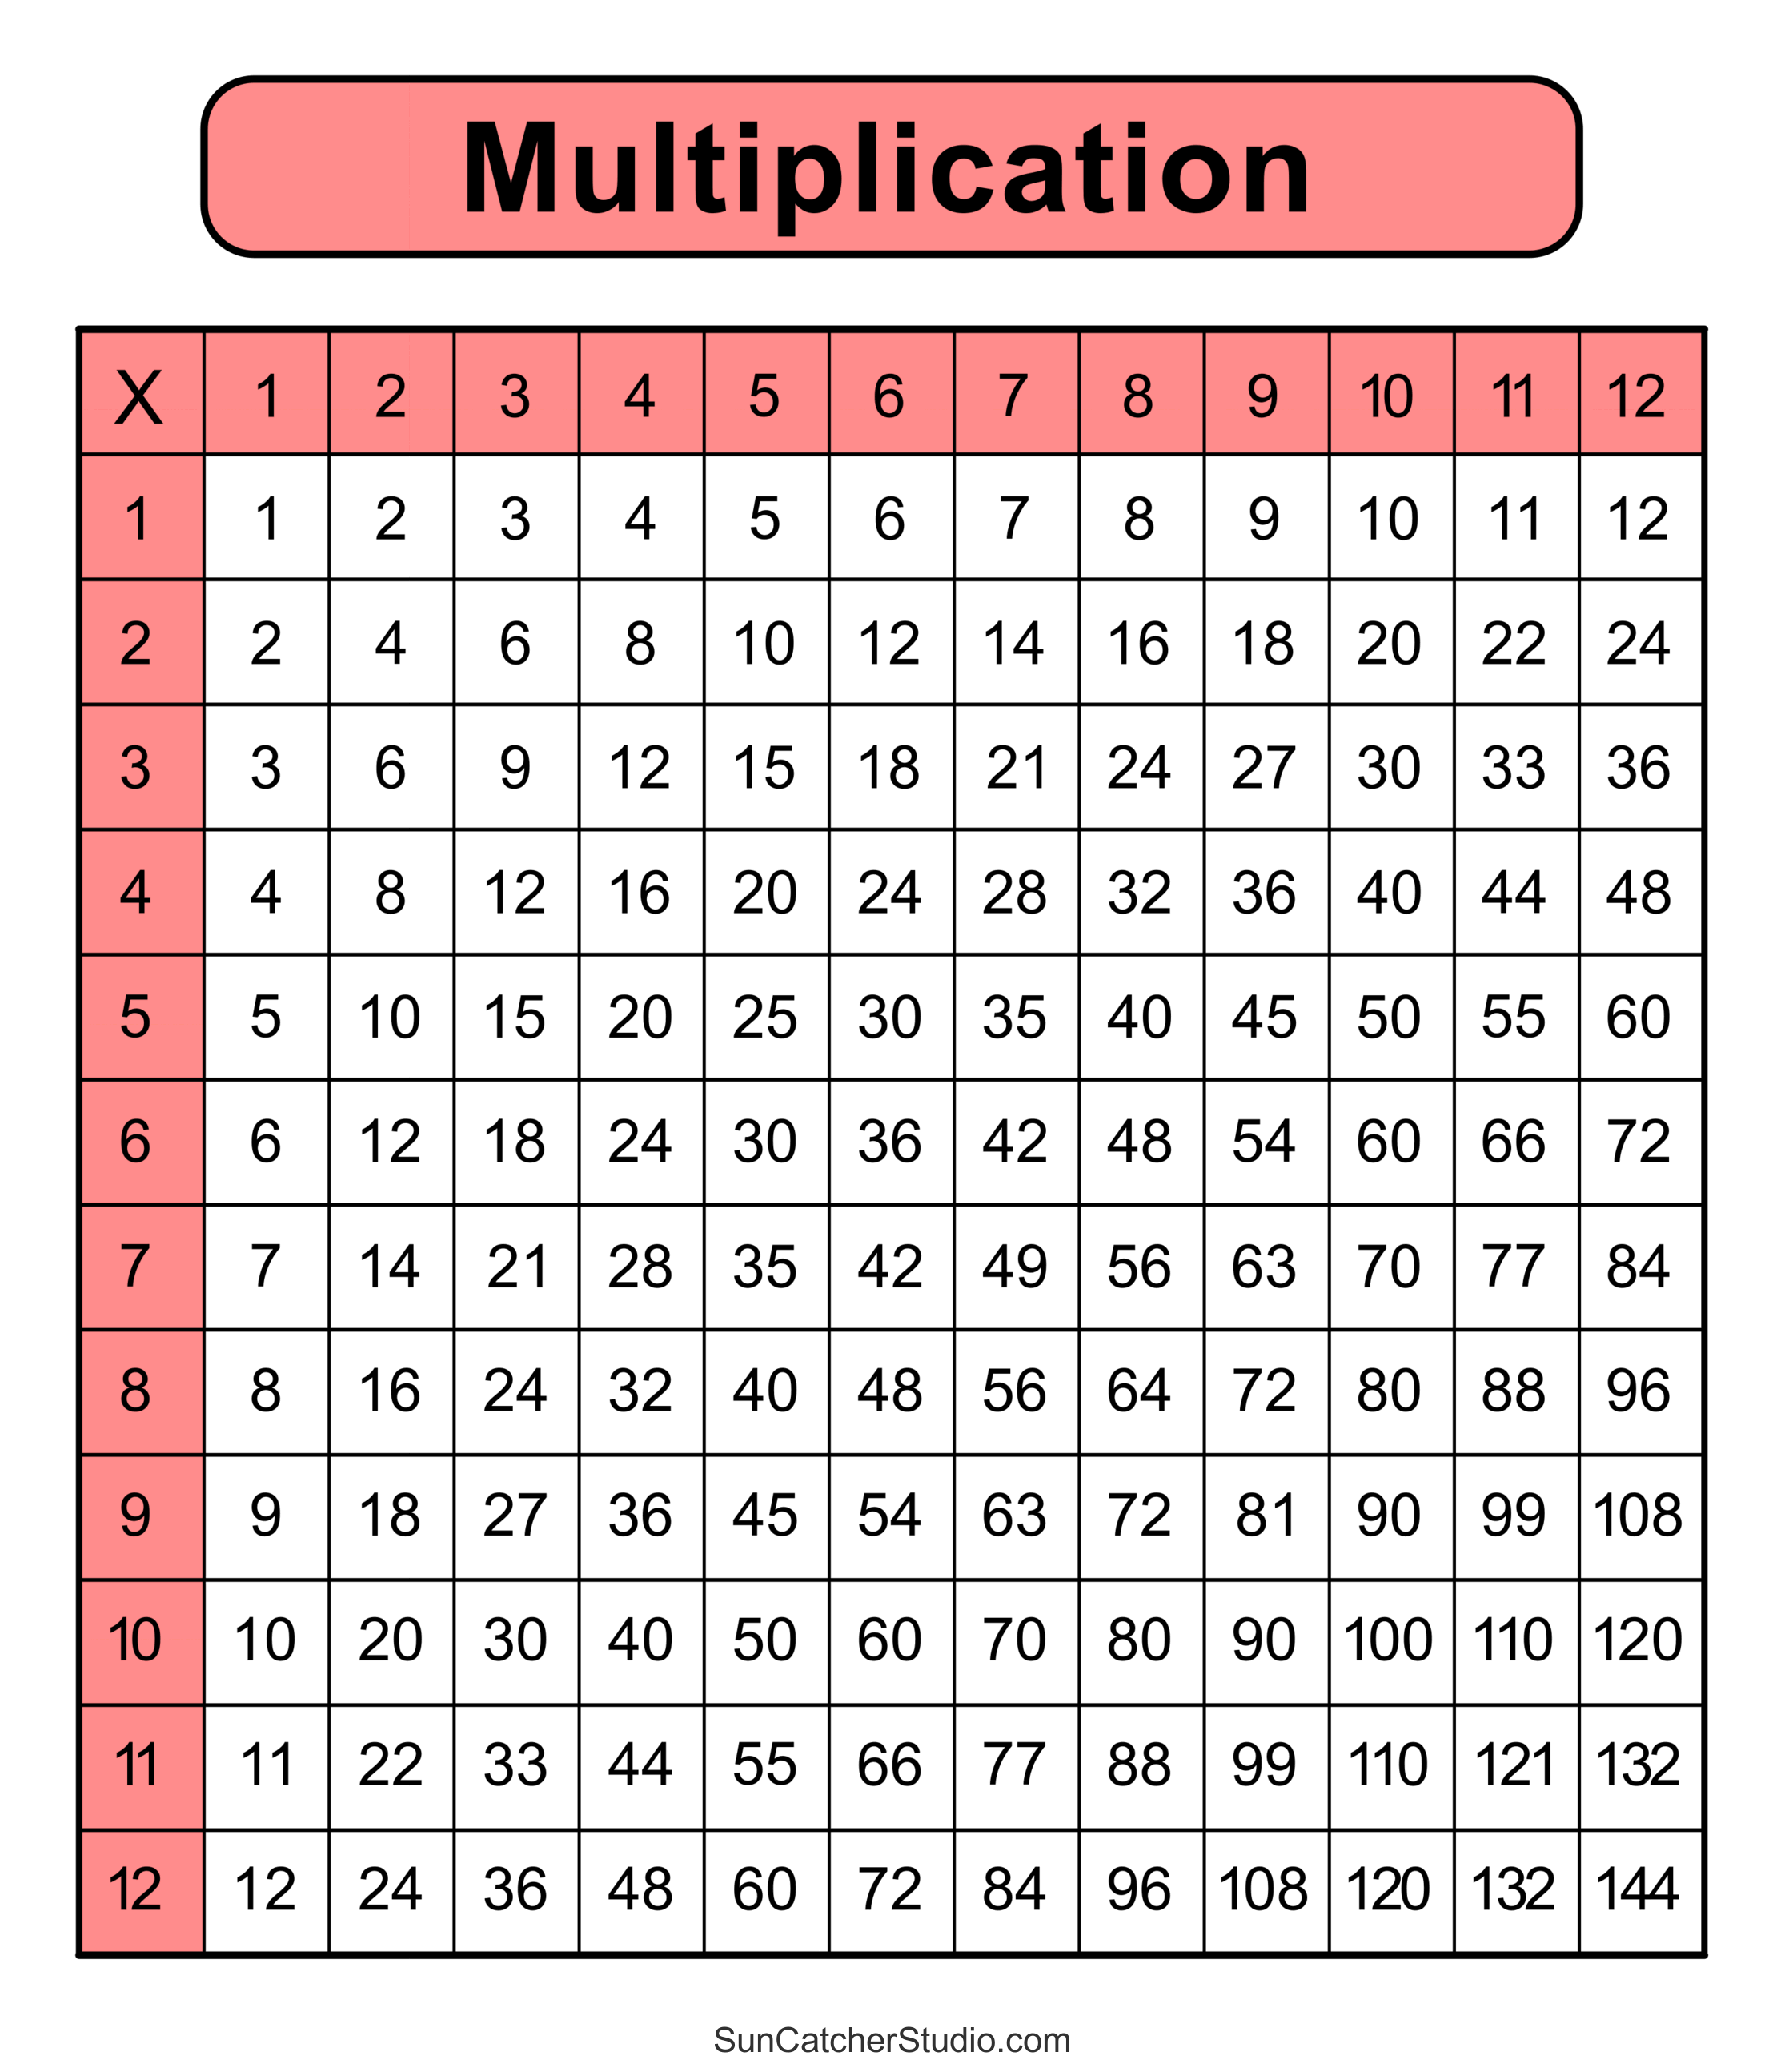 Multiplication Facts Chart Pdf